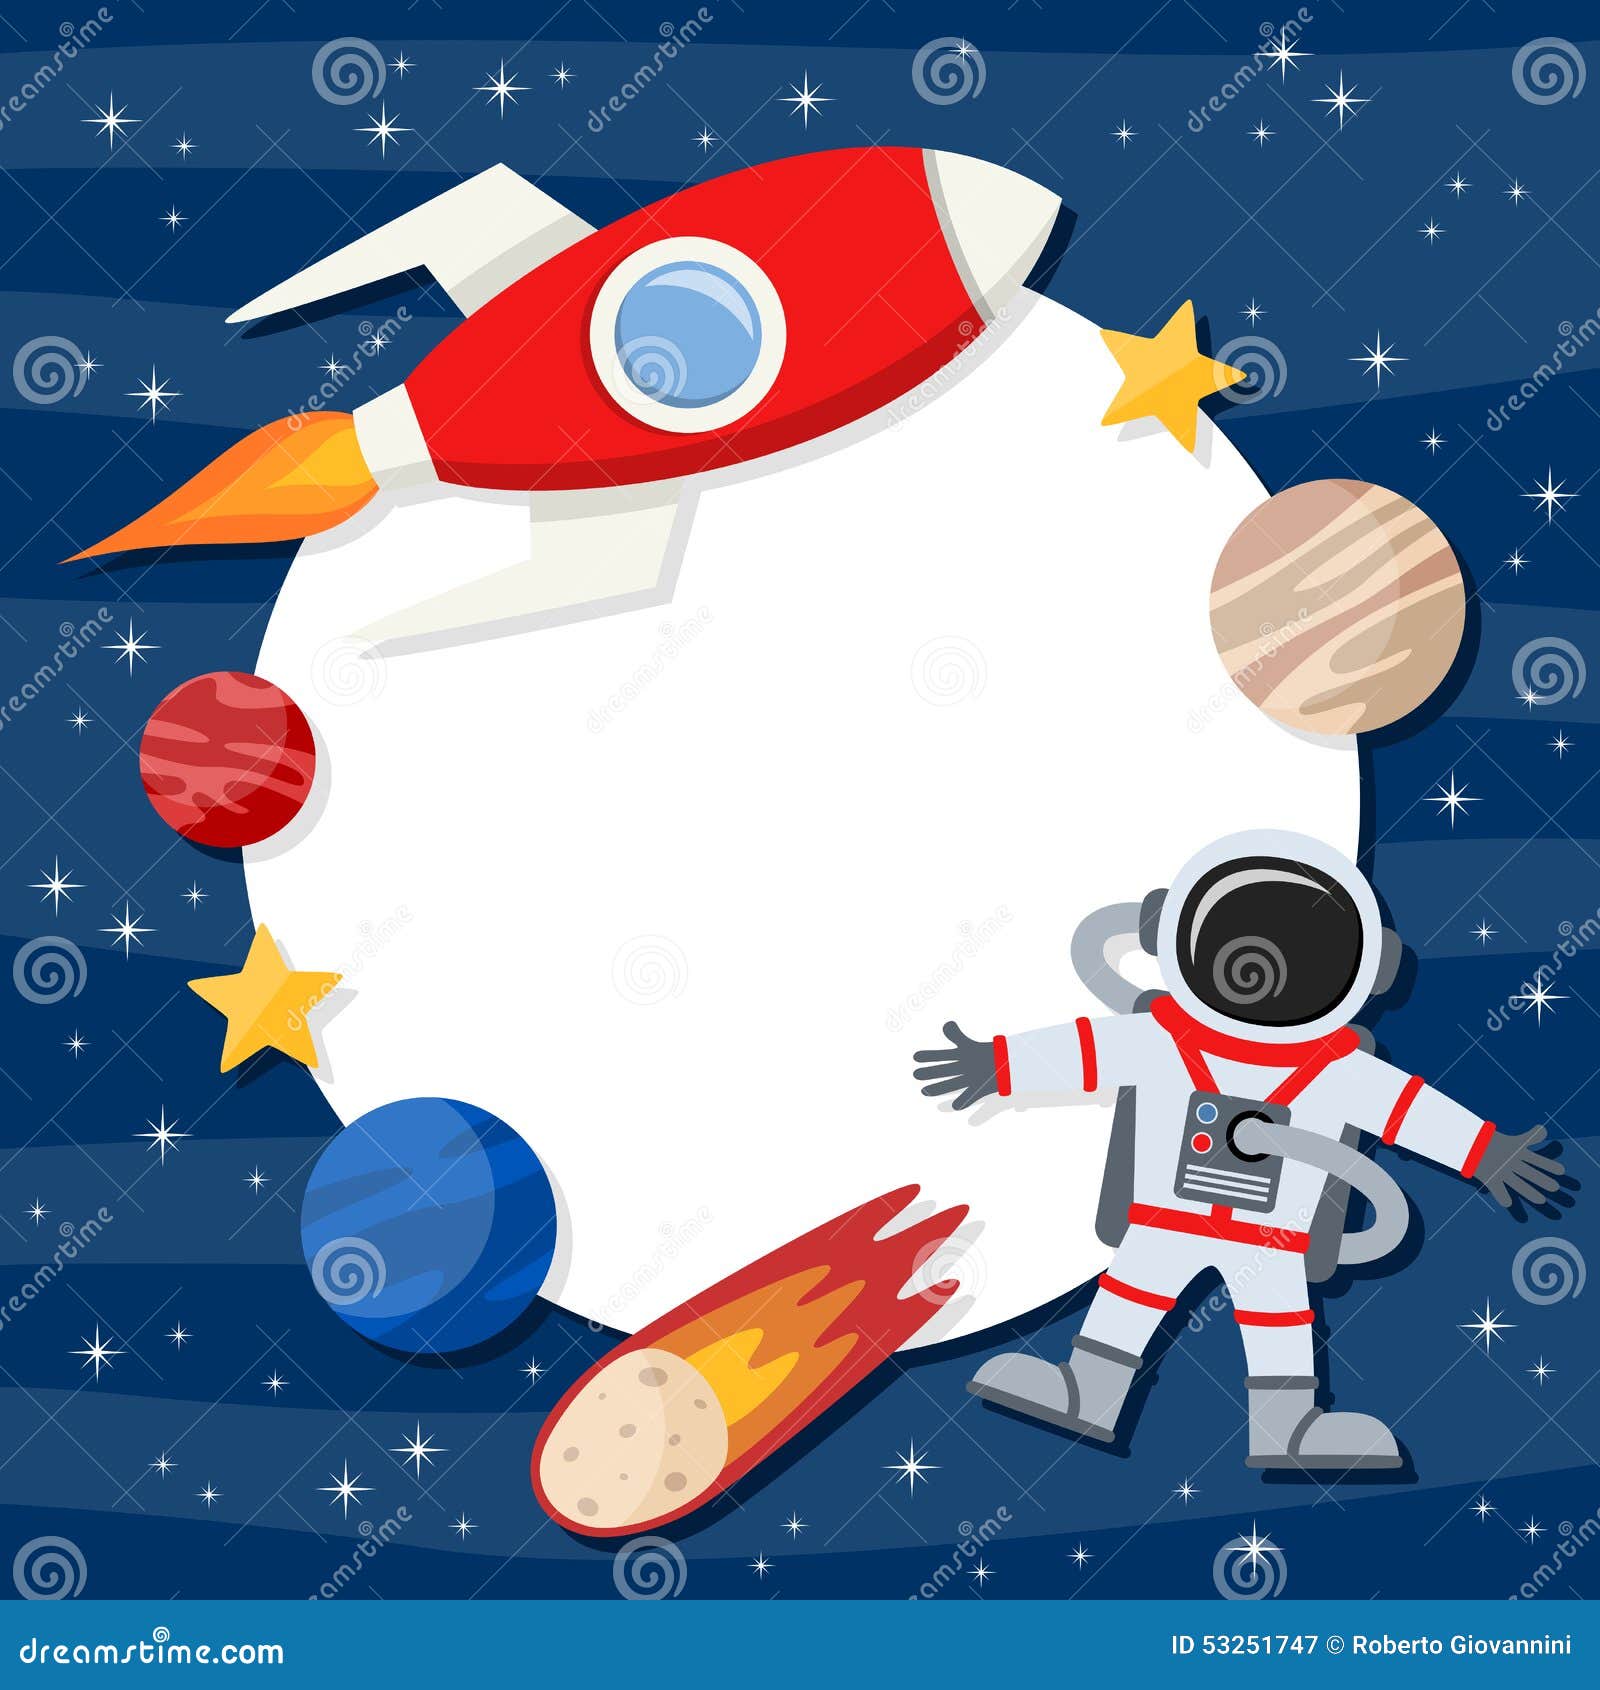 space clipart borders - photo #28